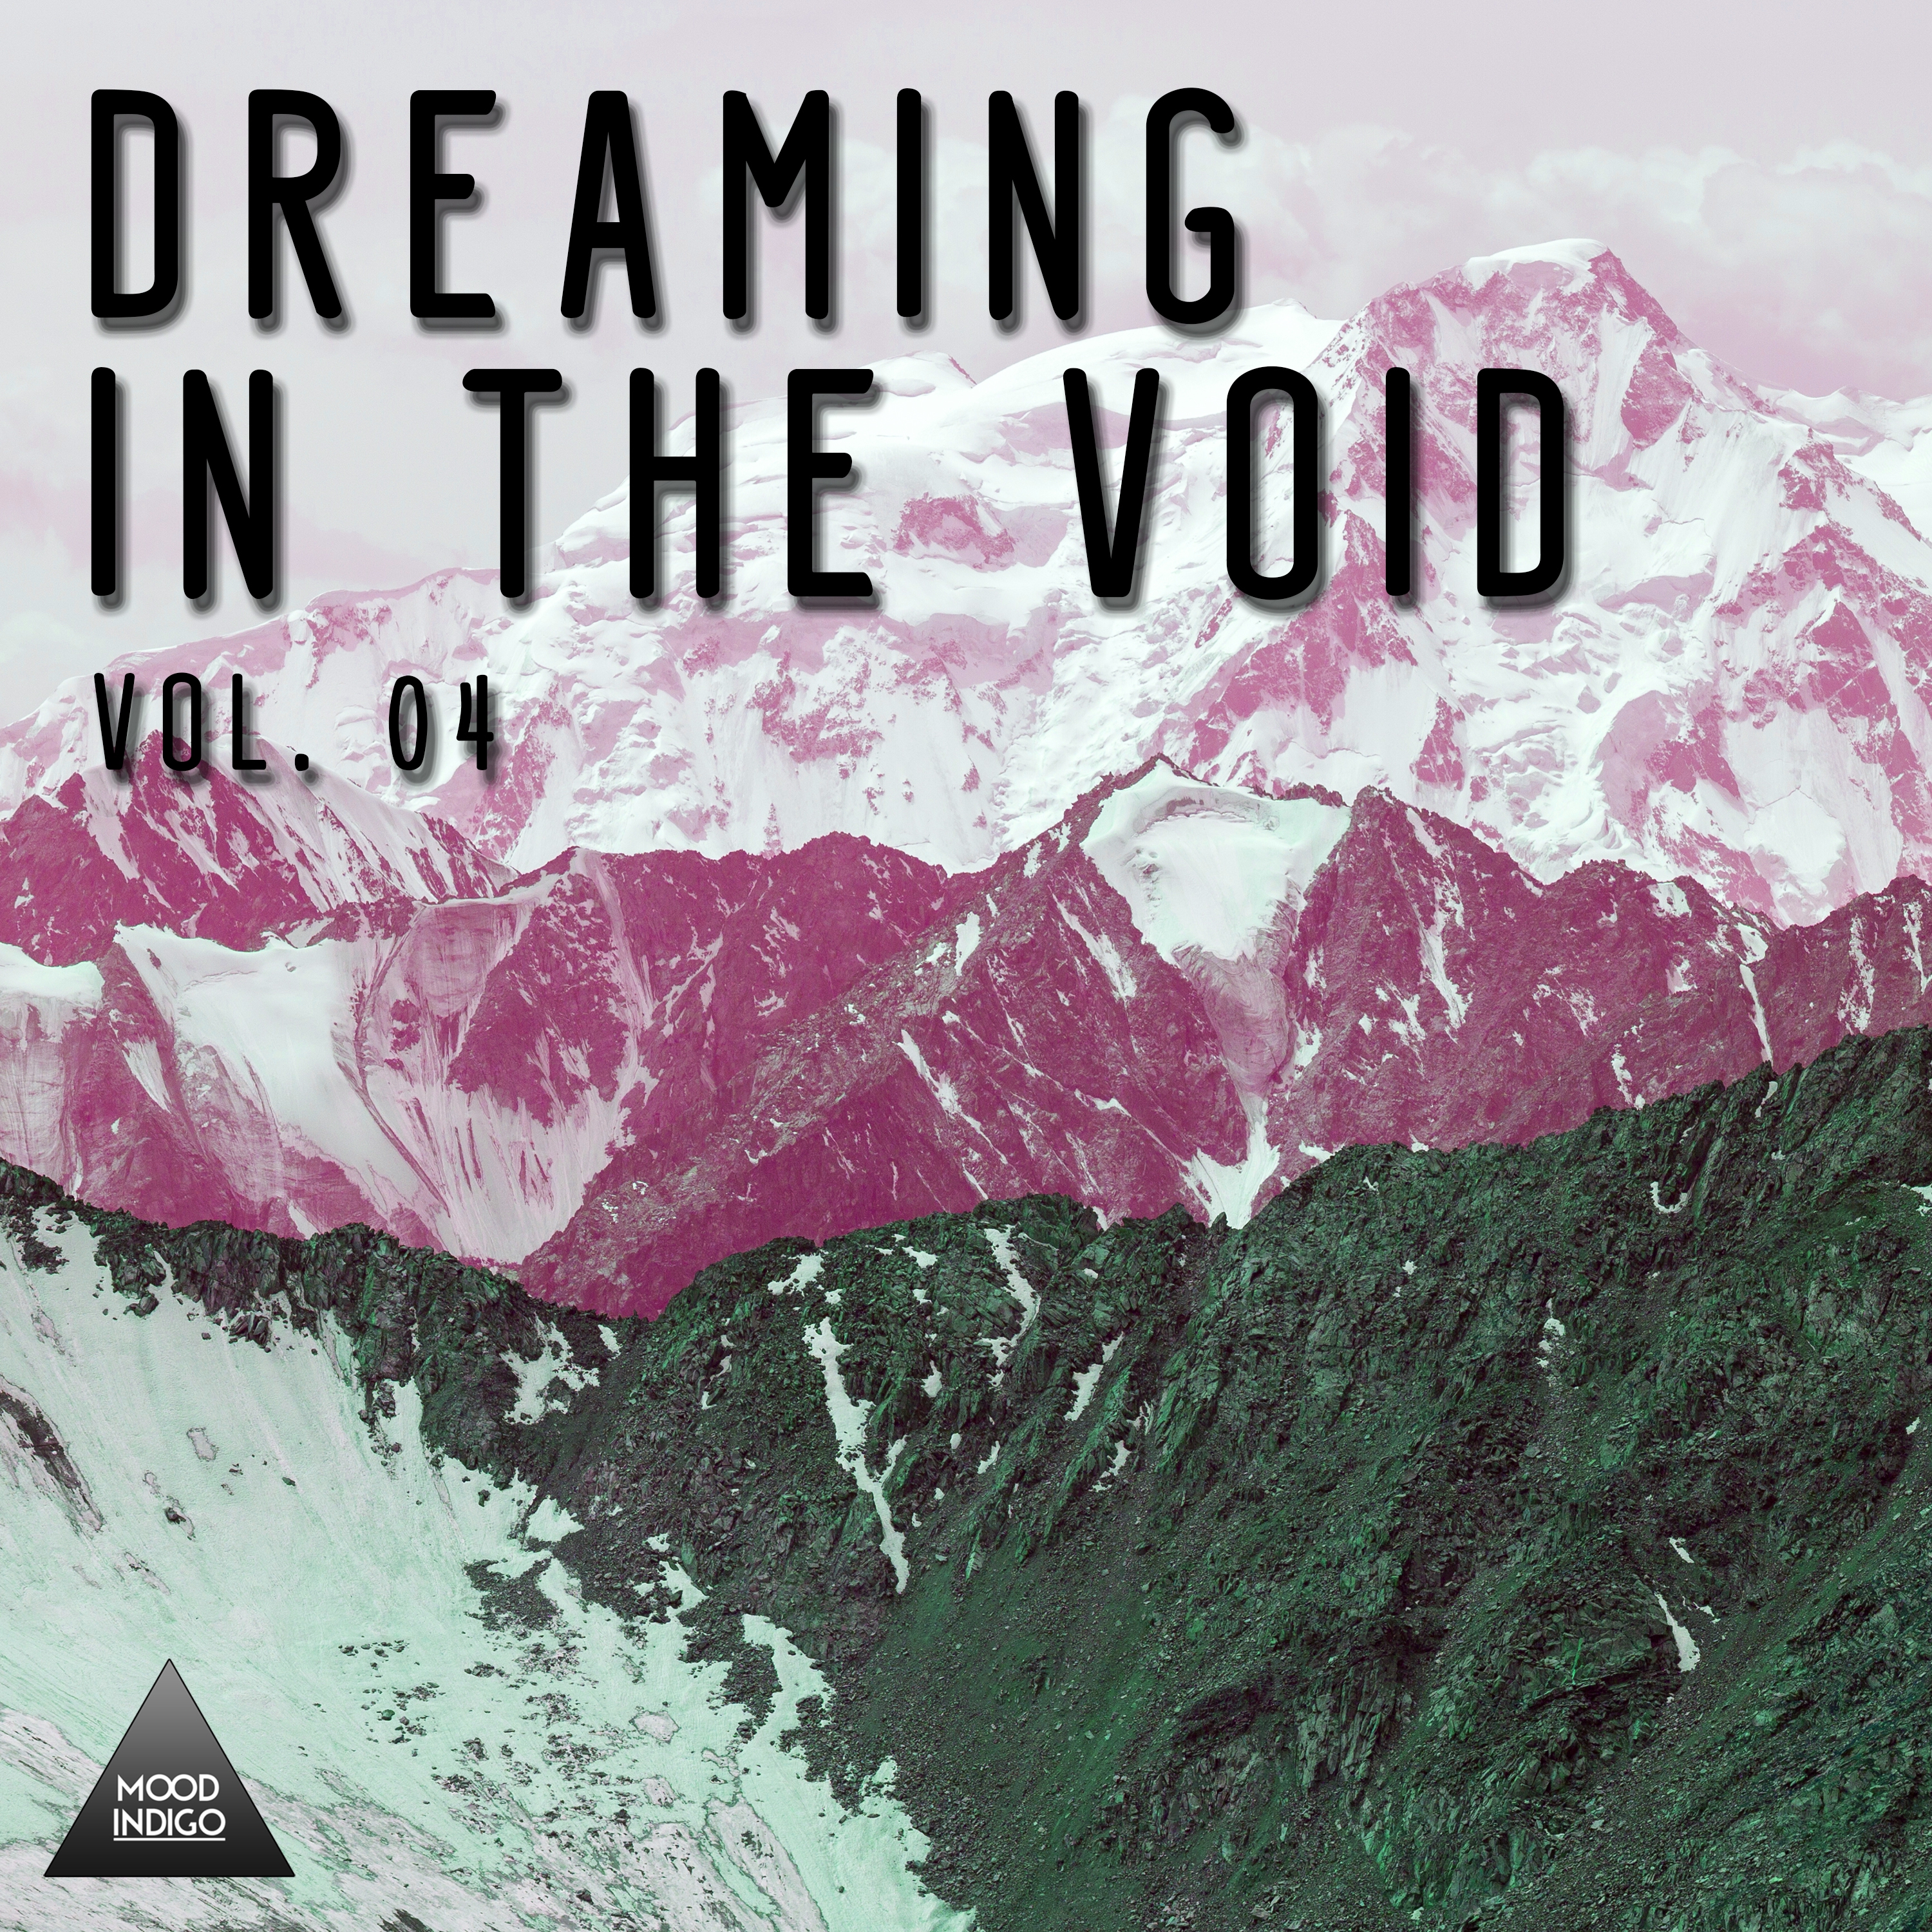 Dreaming in the Void, Vol. 04